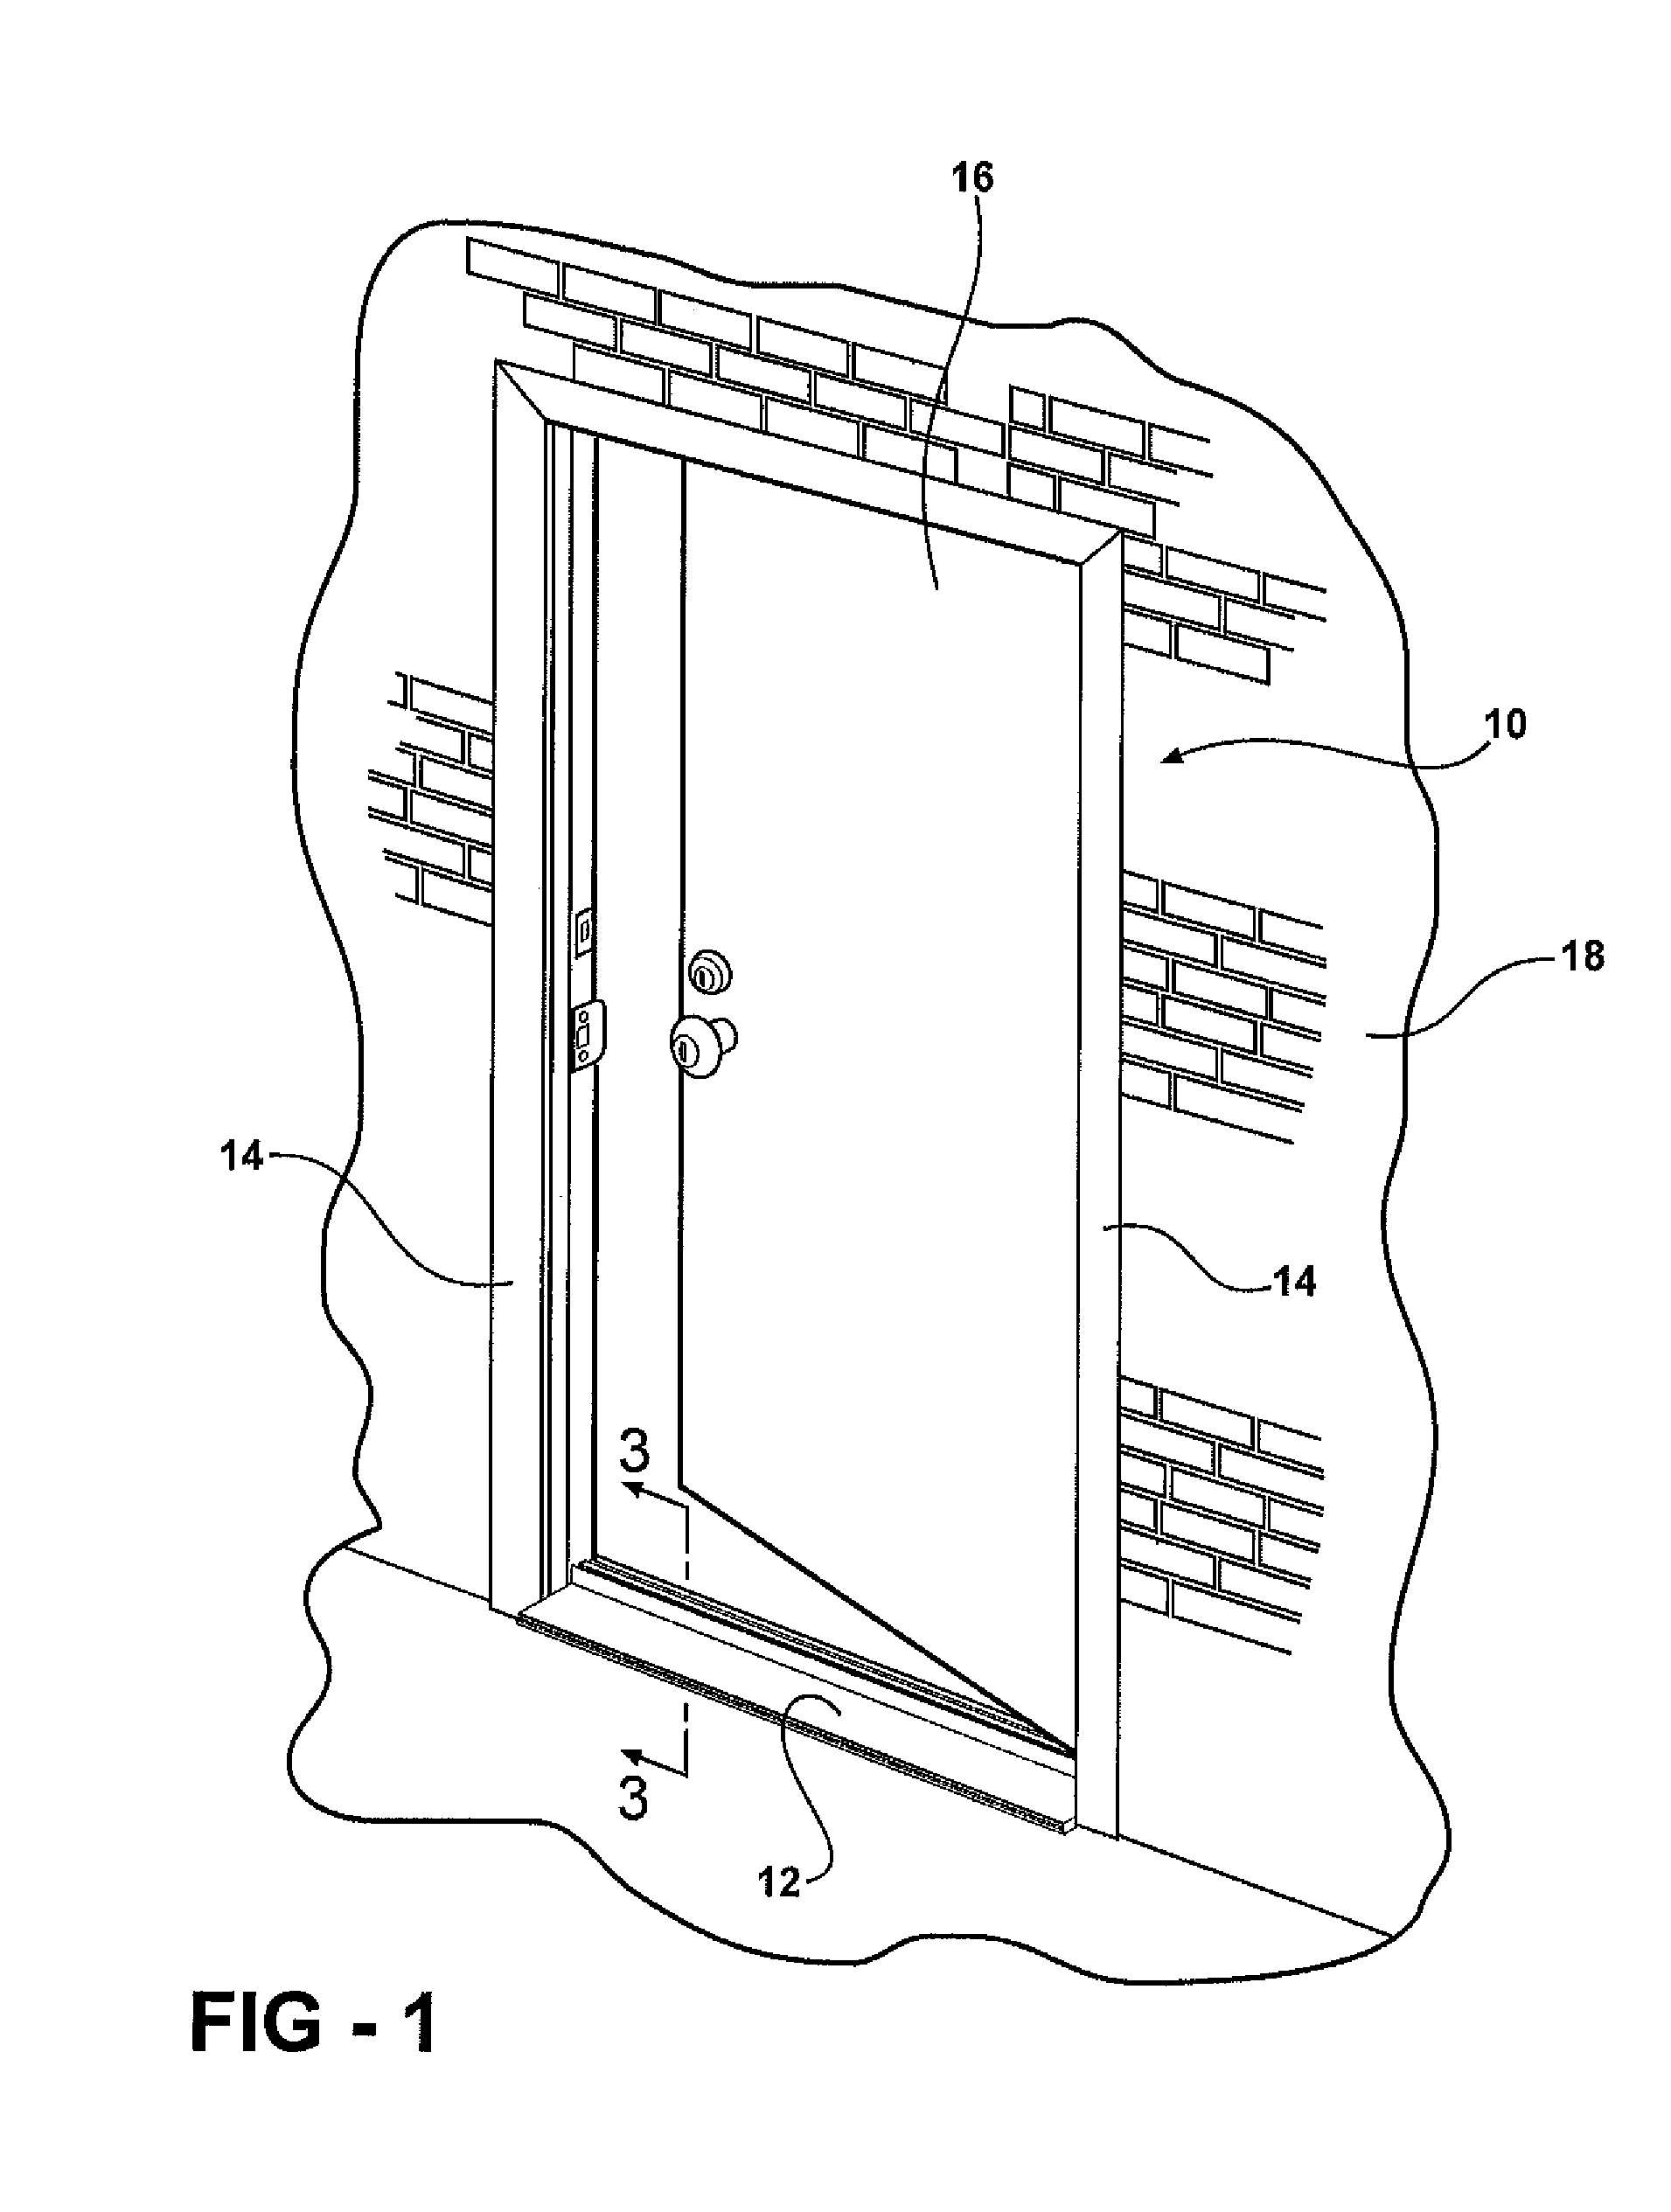 Entryway system including a threshold assembly